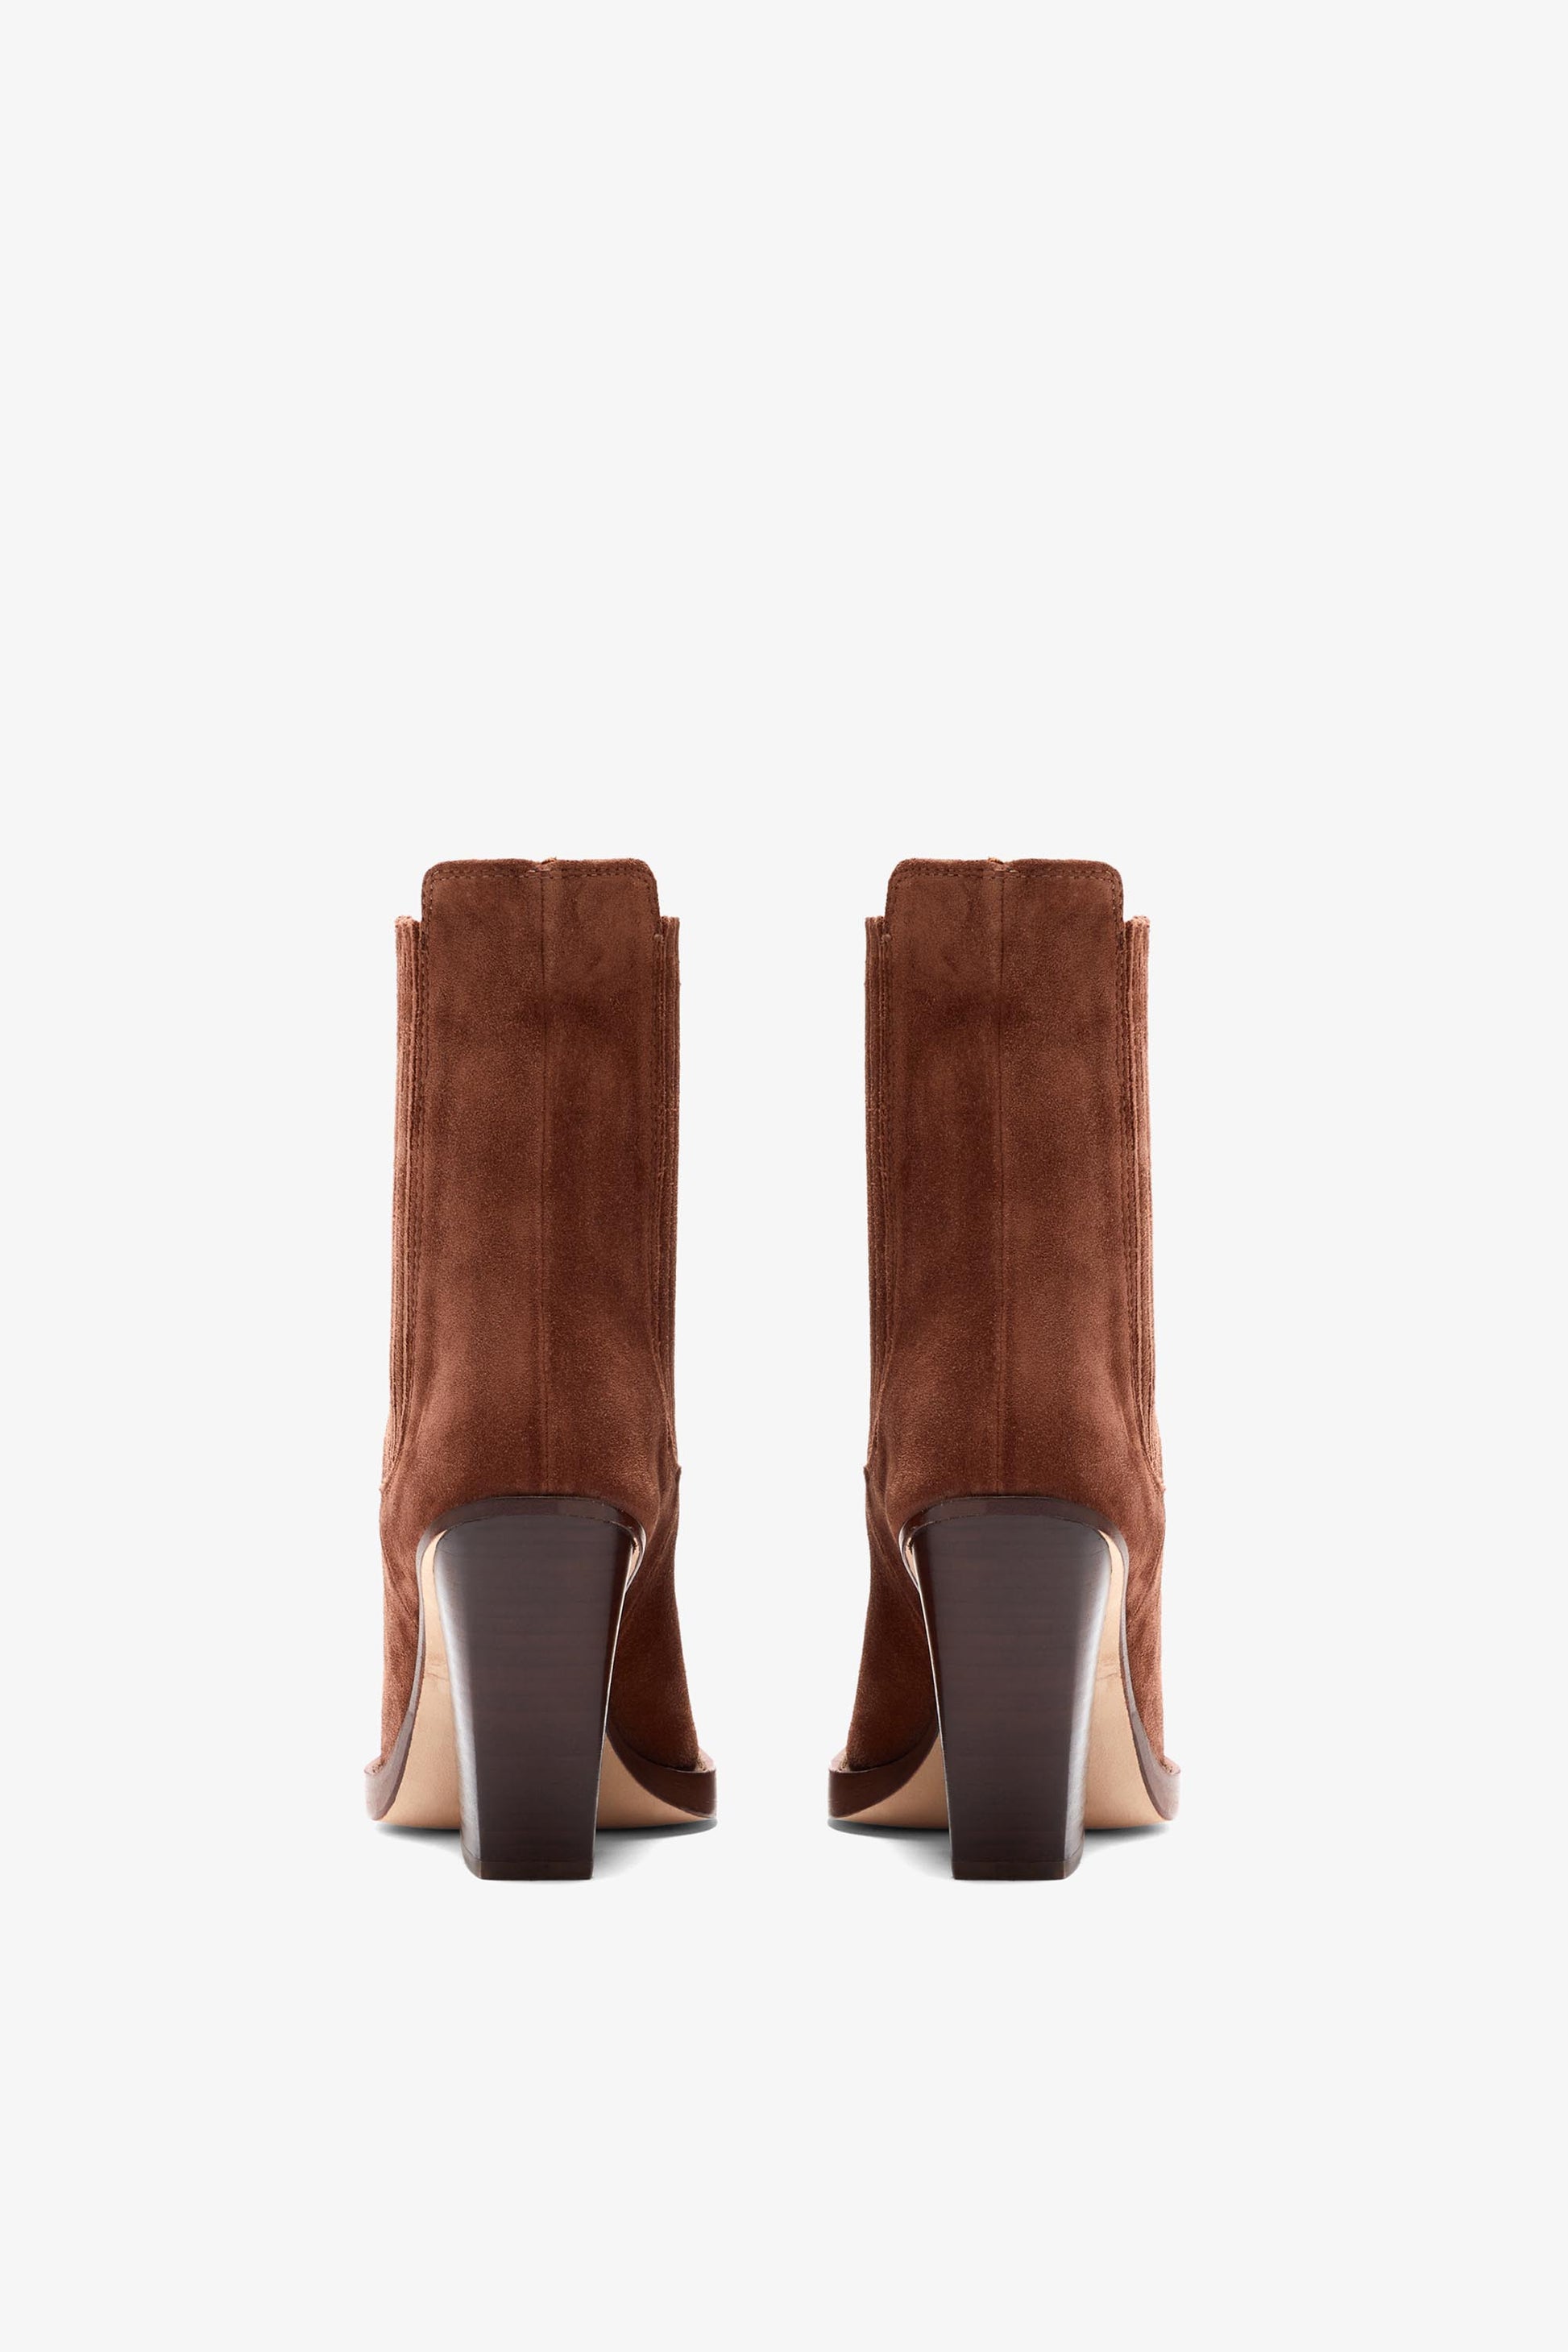 Canyon brown calf suede ankle boots